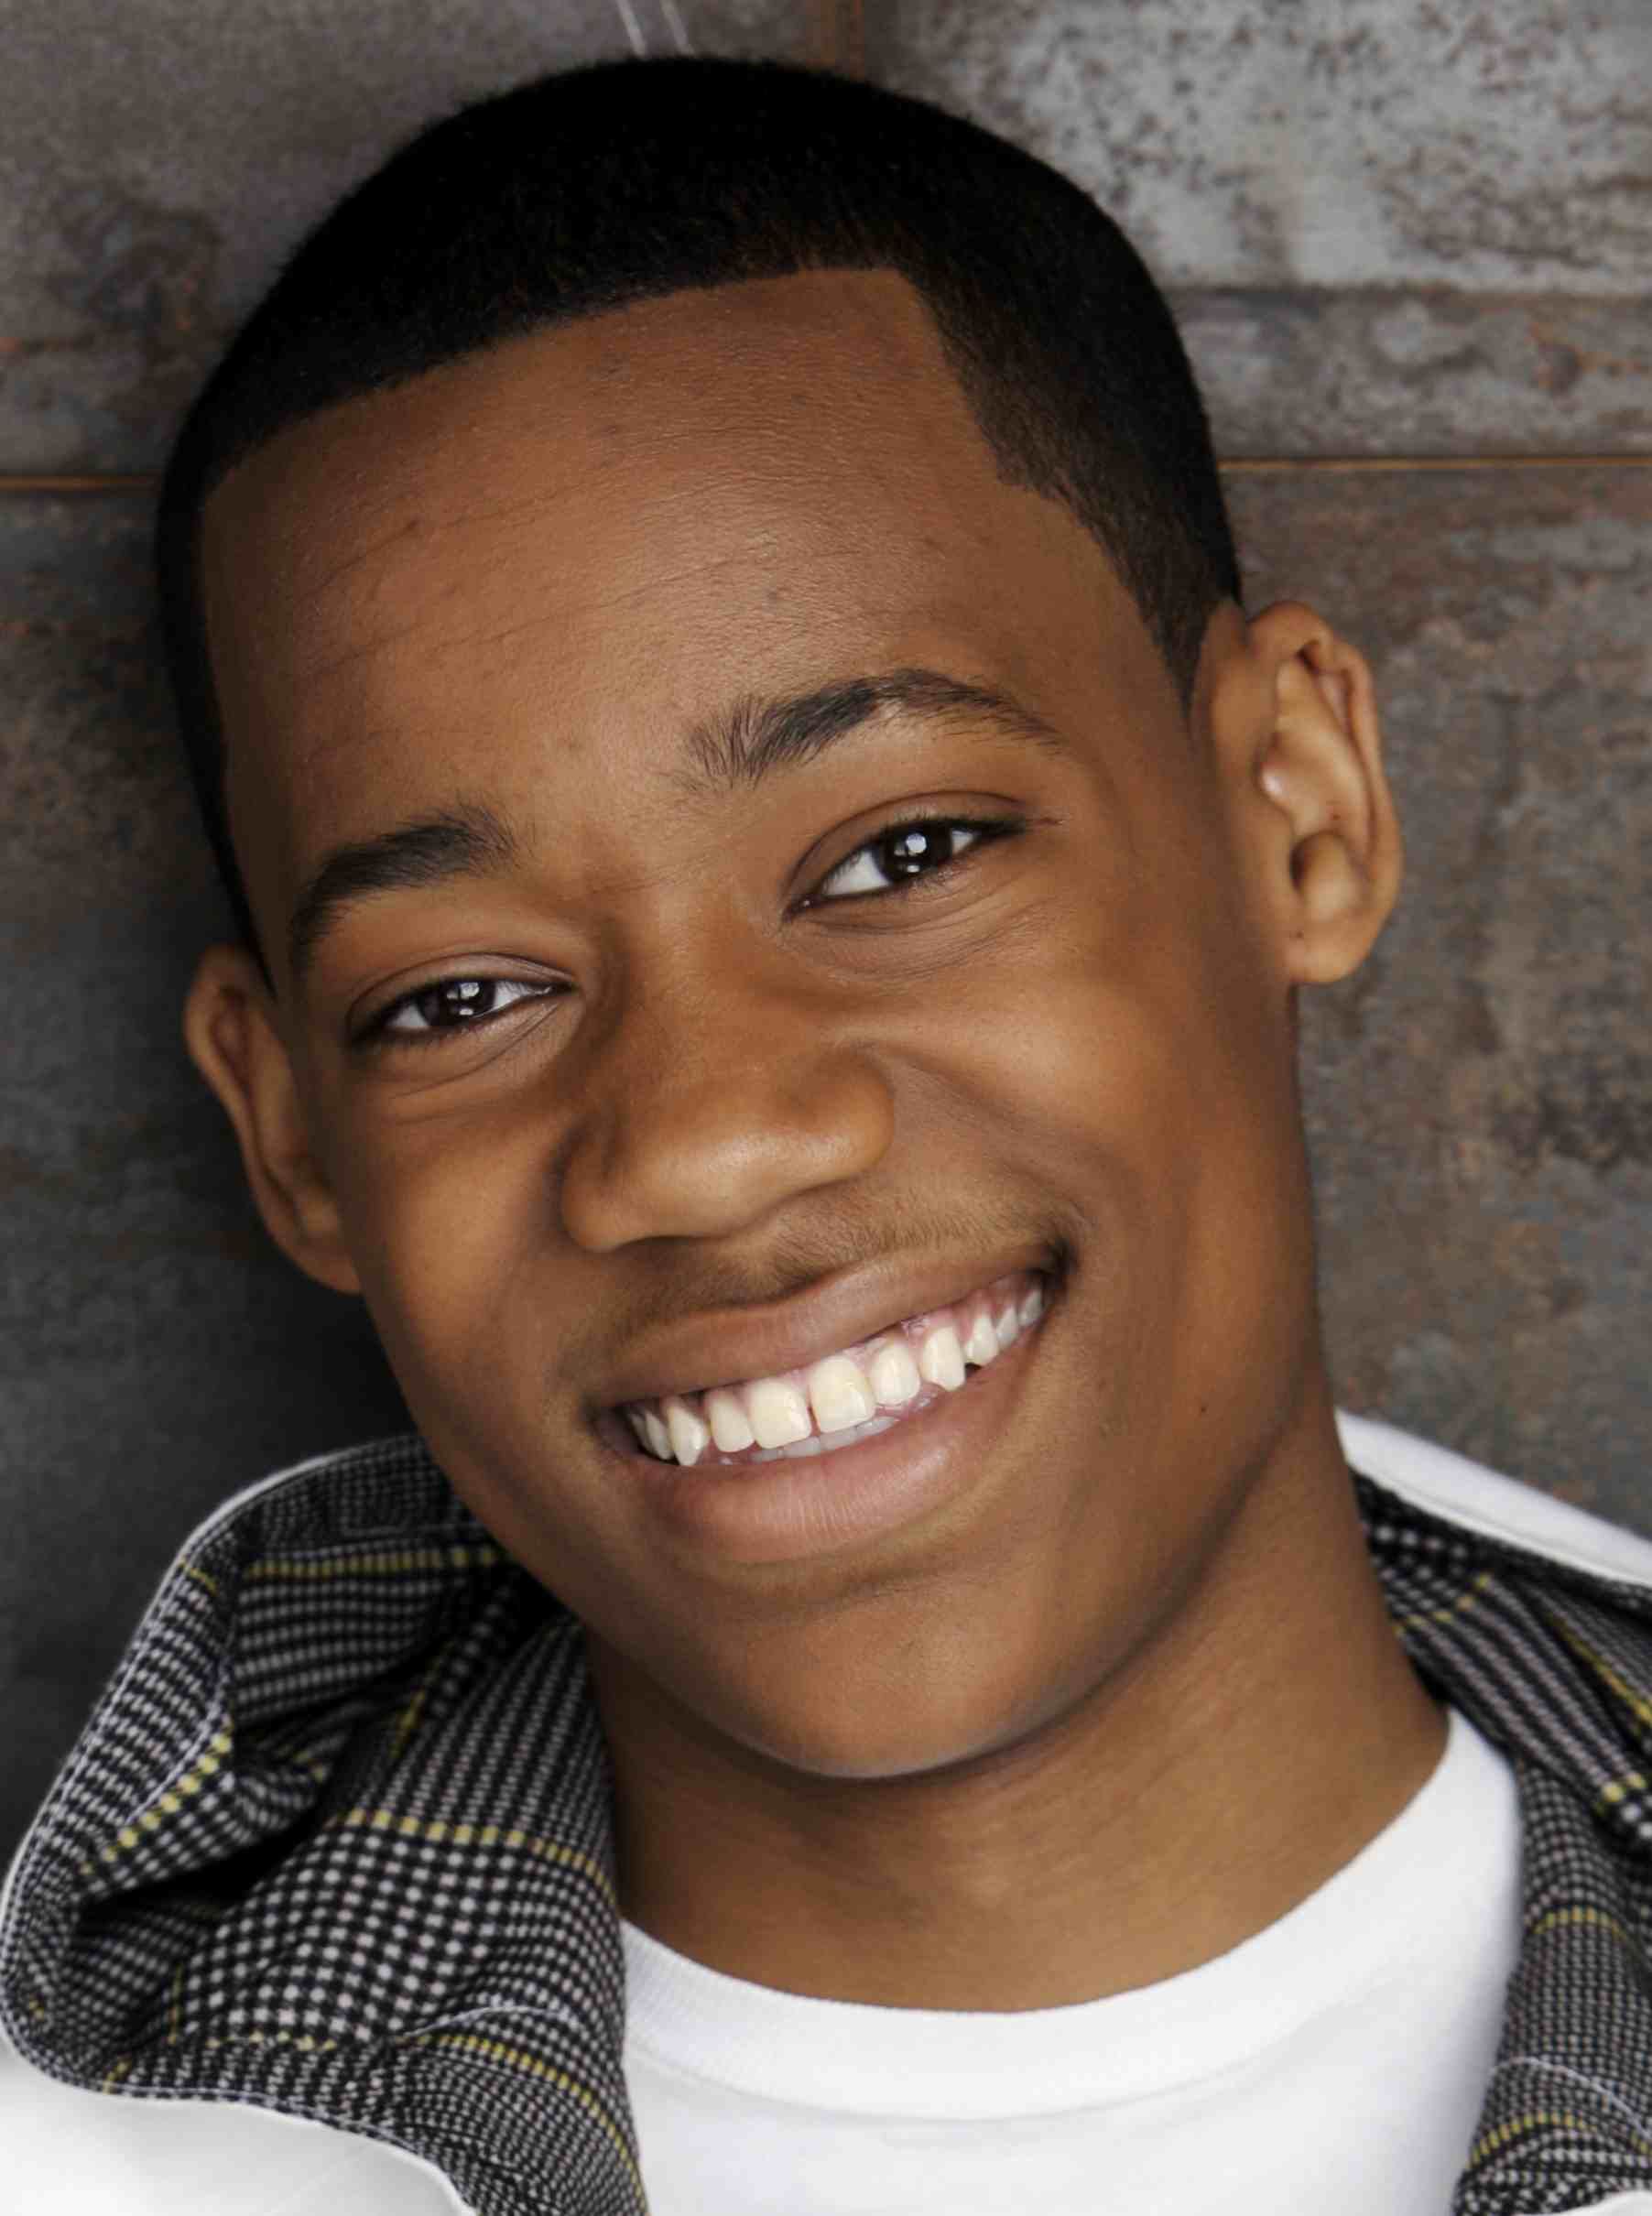 Tyler James From Everybody Hates Chris Got His First Real Girlfriend And She Is Too Cute For Words. Tyler james, African american actors, American actors